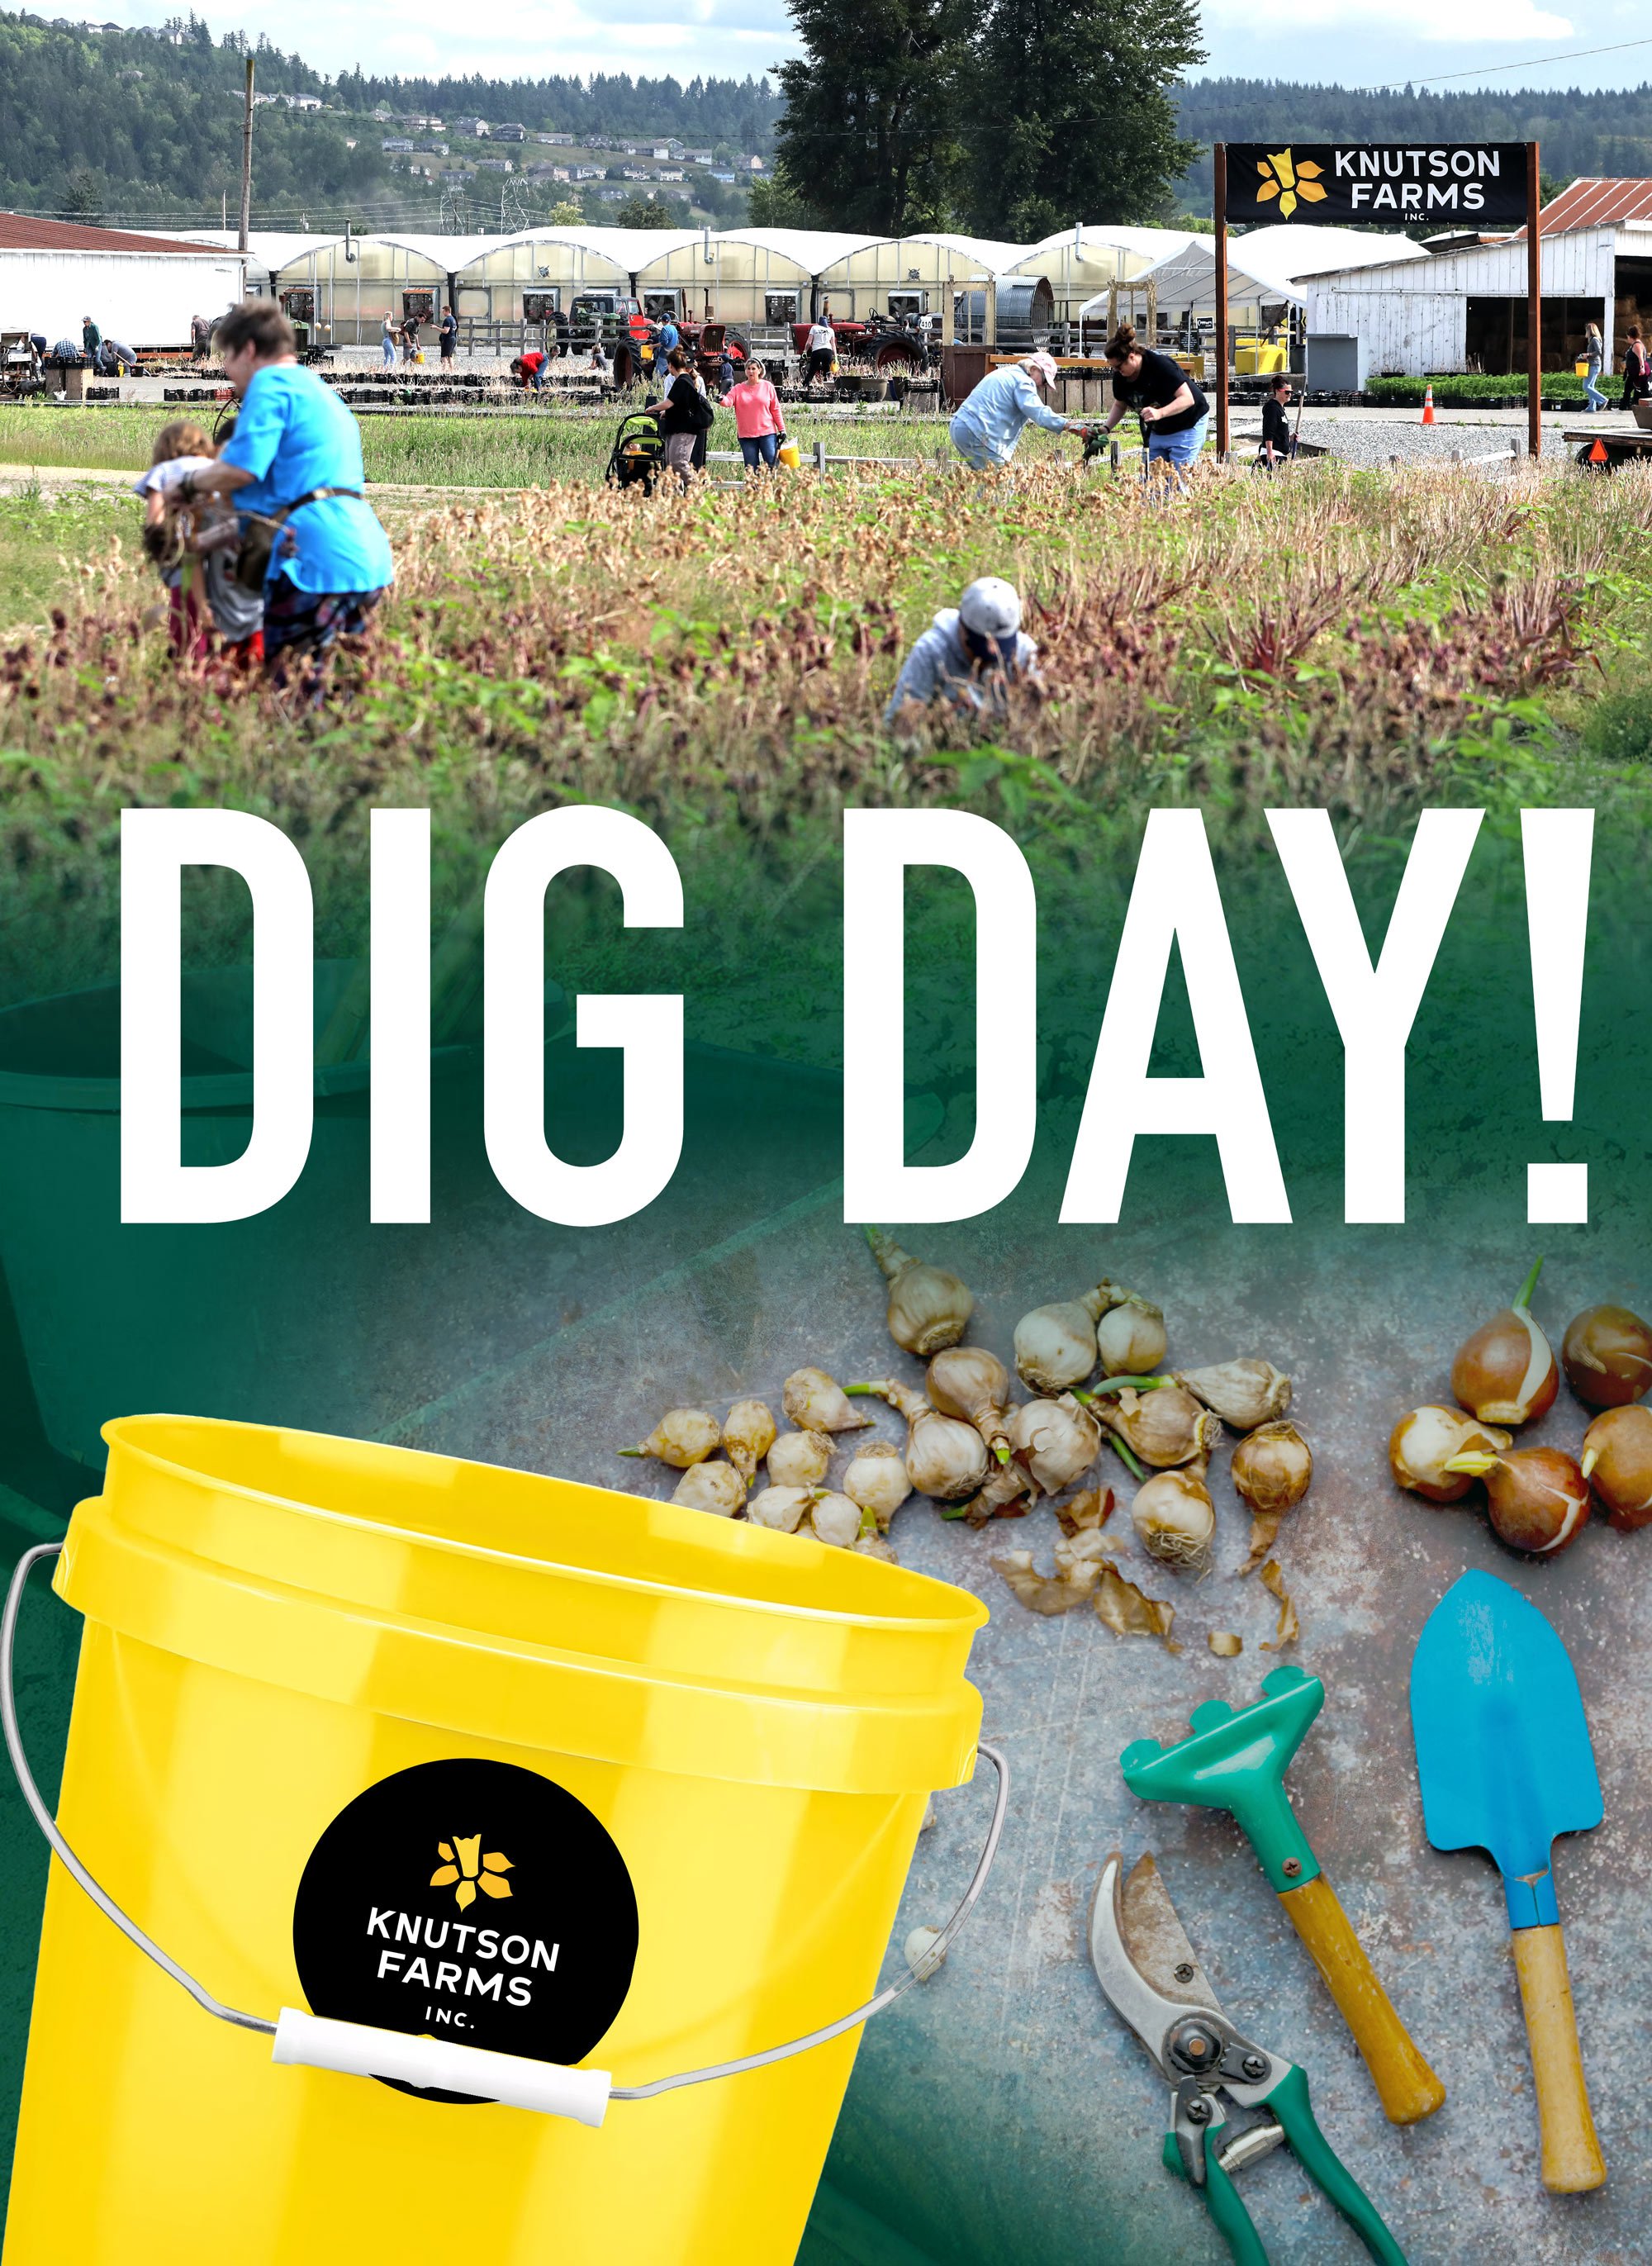 DIG DAY EVENT